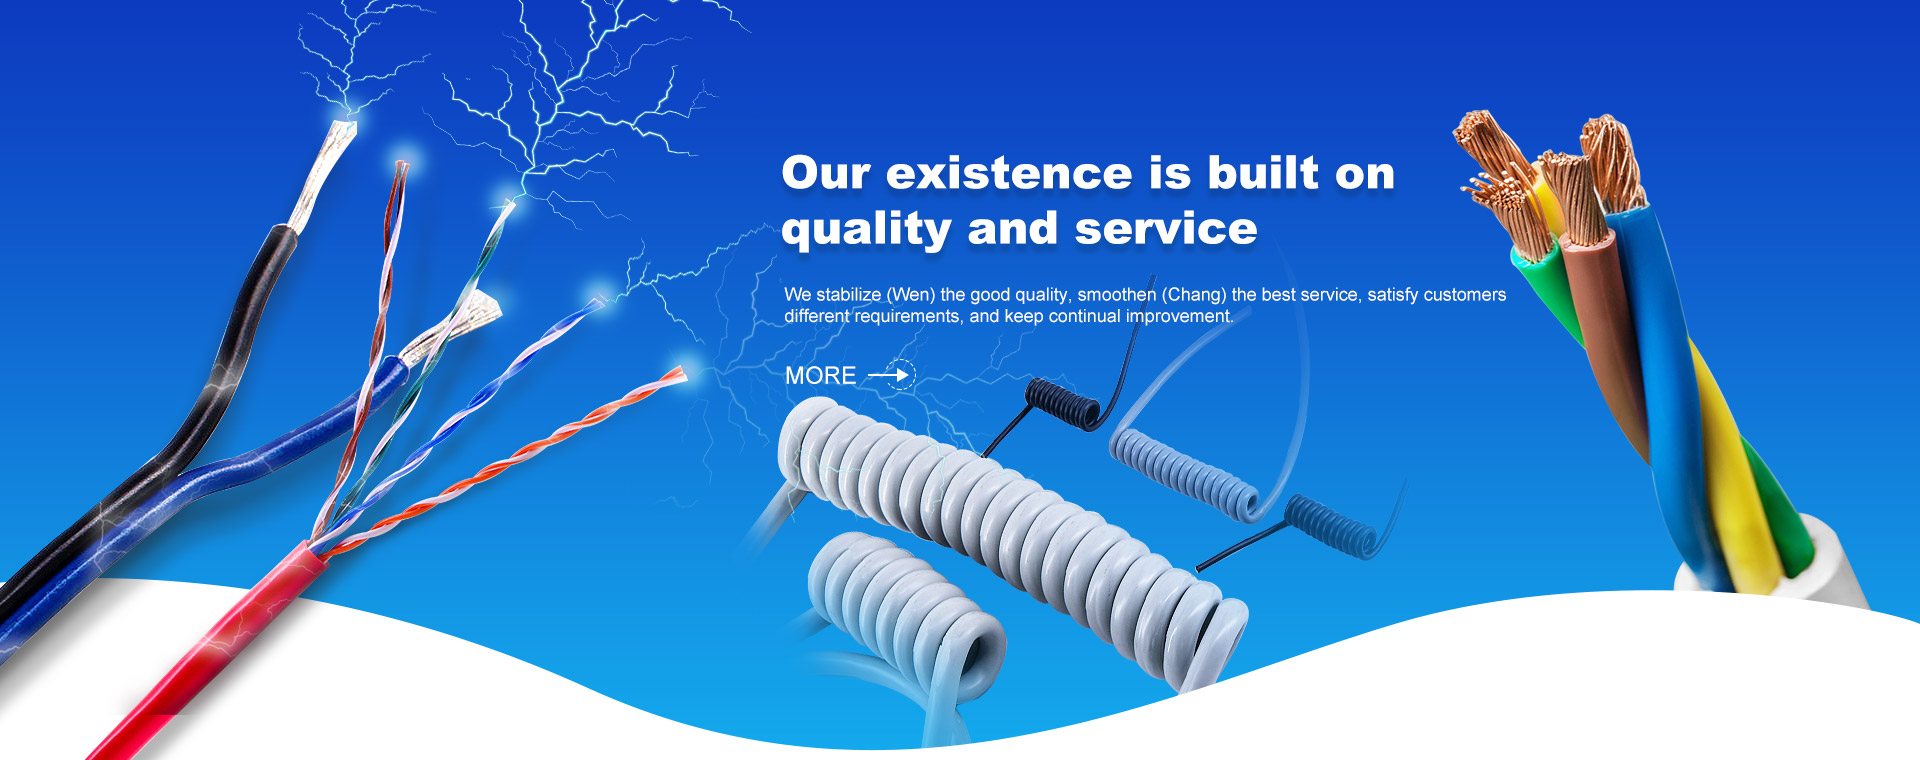 Our existence is built on  quality and service